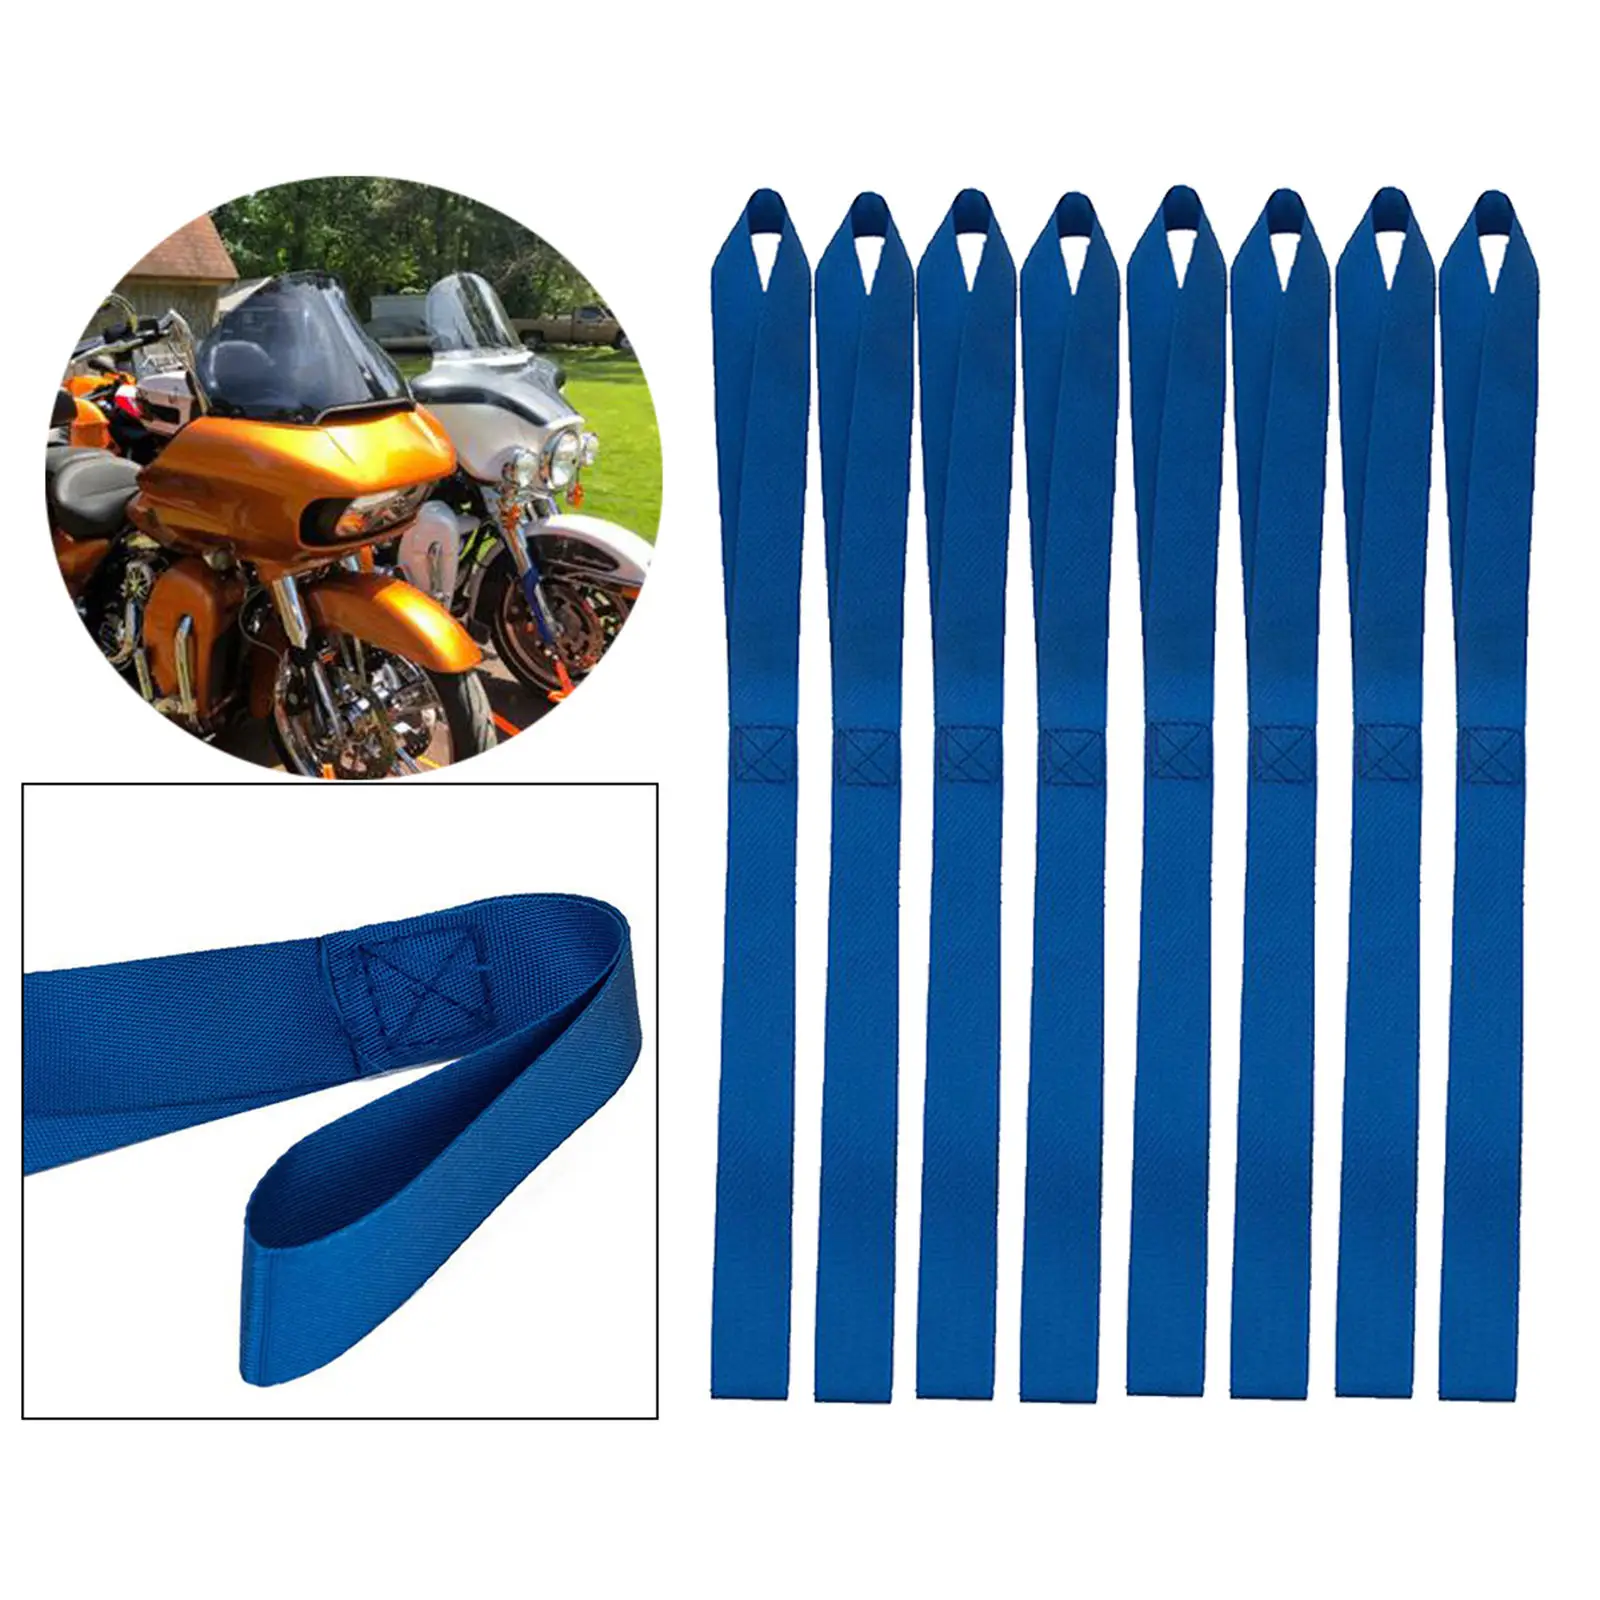 8 Pieces Blue Soft Loop Tie Down Straps for Towing ATV UTV Abrasion Resistance 49N Tensile Strength